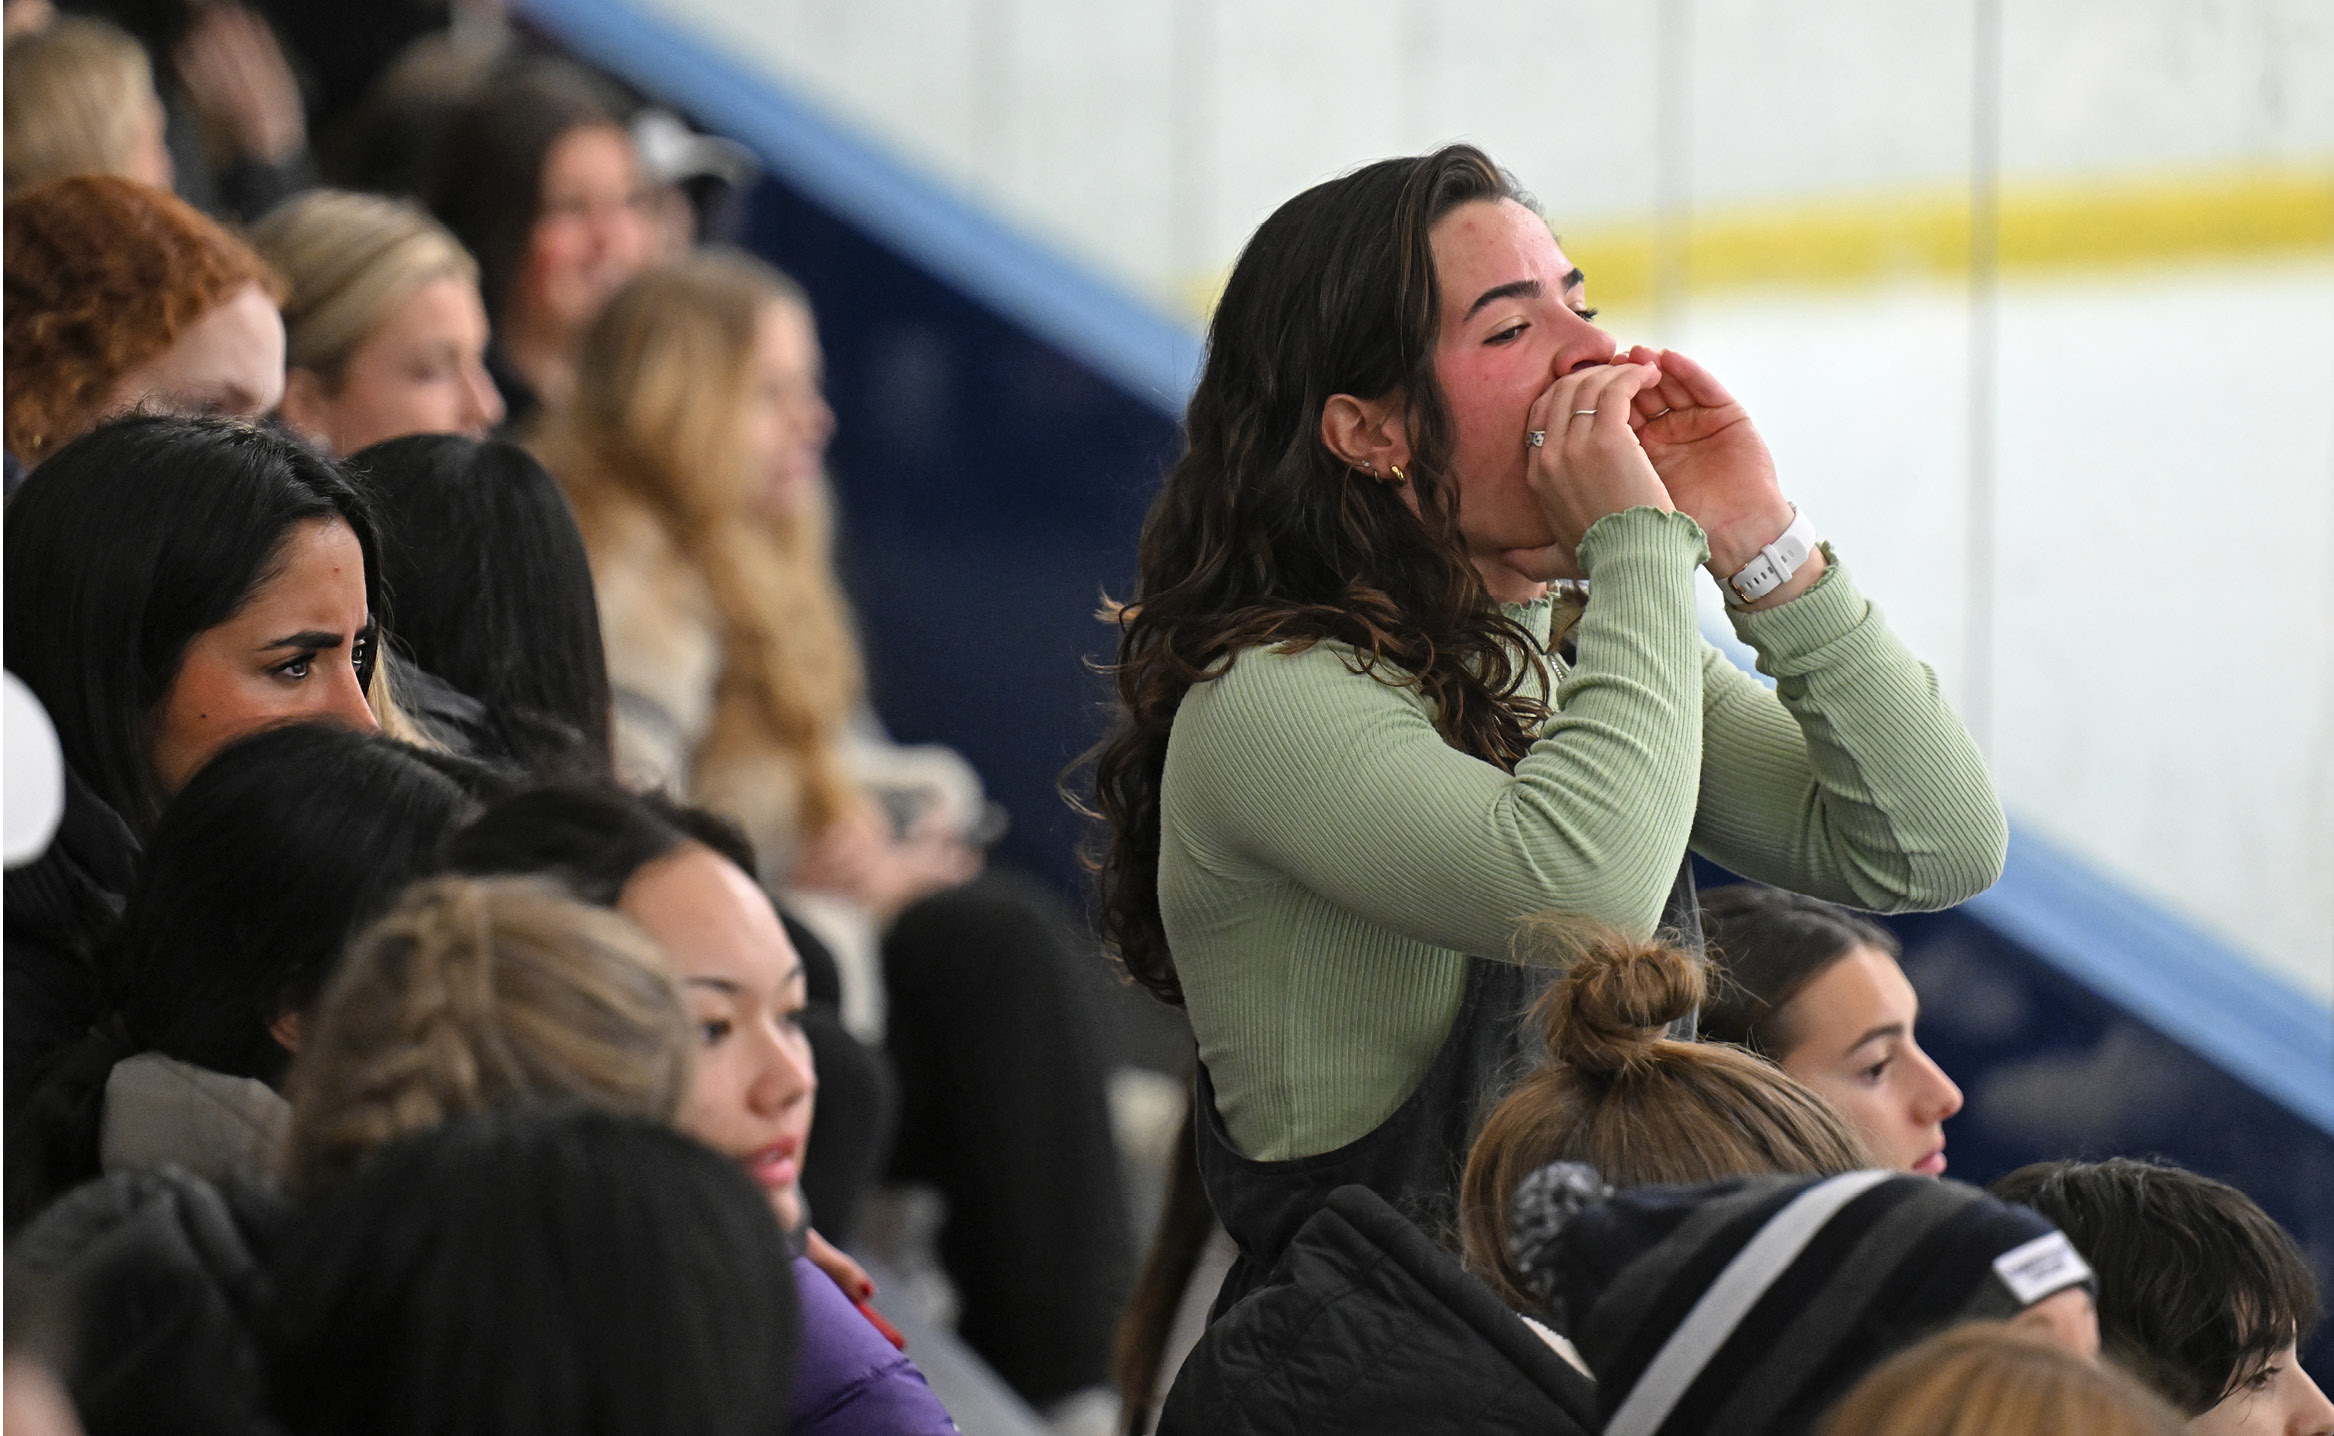 A female fan cheers on men's hockey at Dayton Arena.